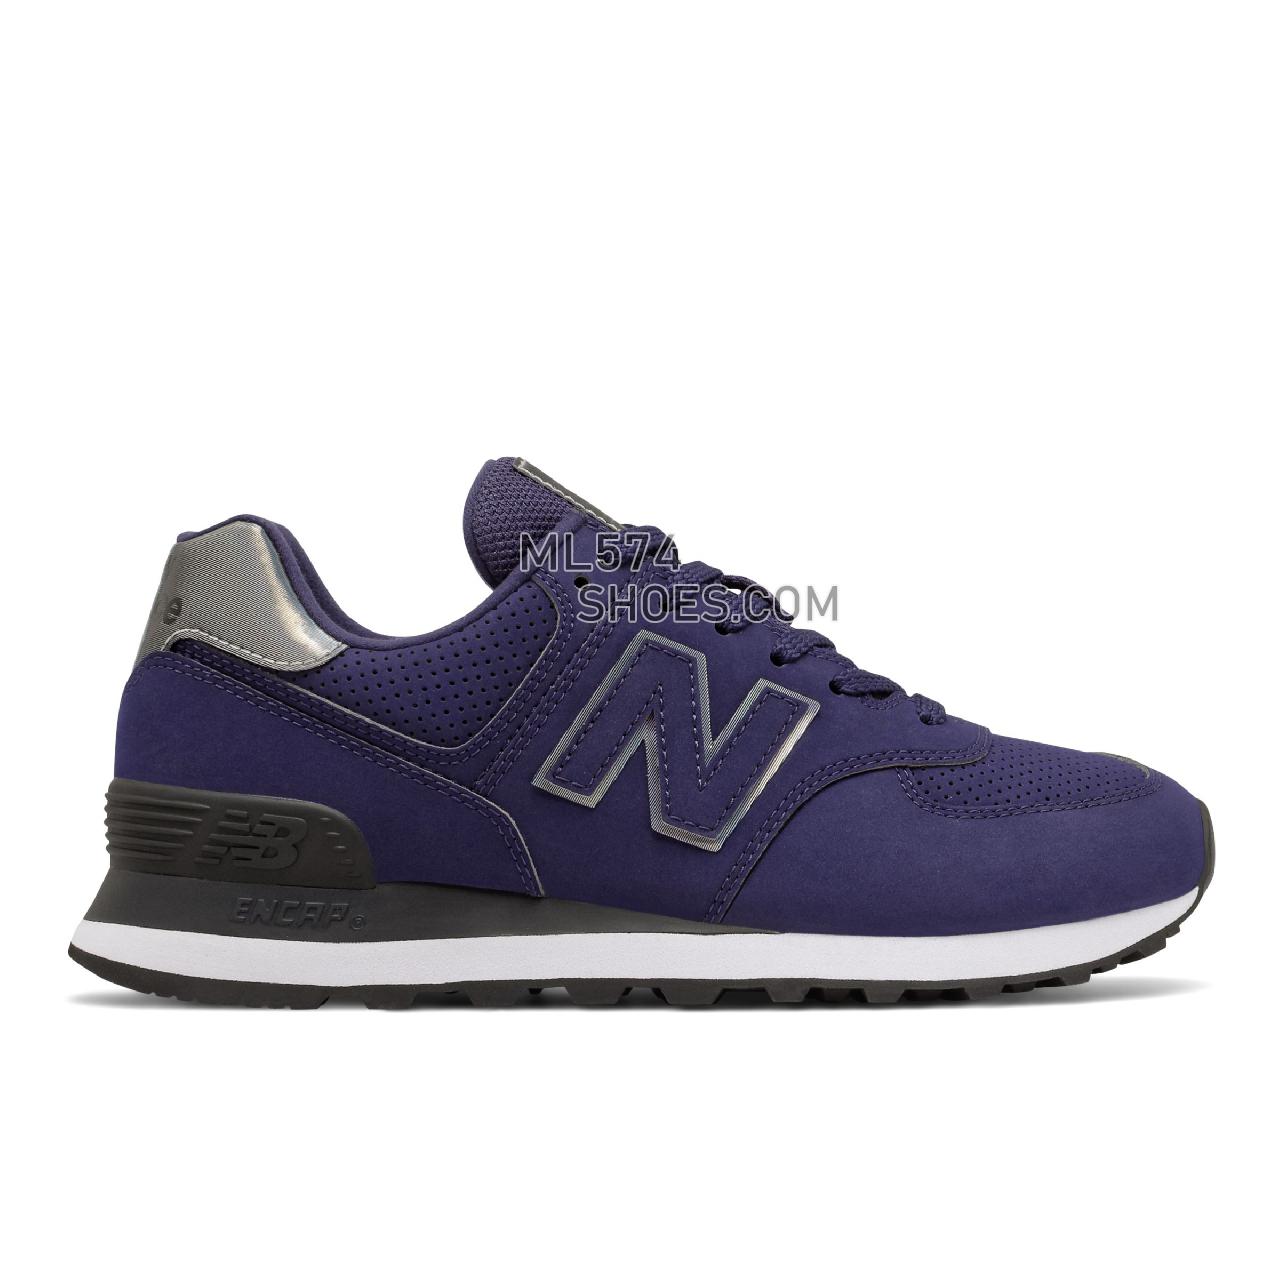 New Balance 574 - Women's Classic Sneakers - Night Tide with Black - WL574DG2